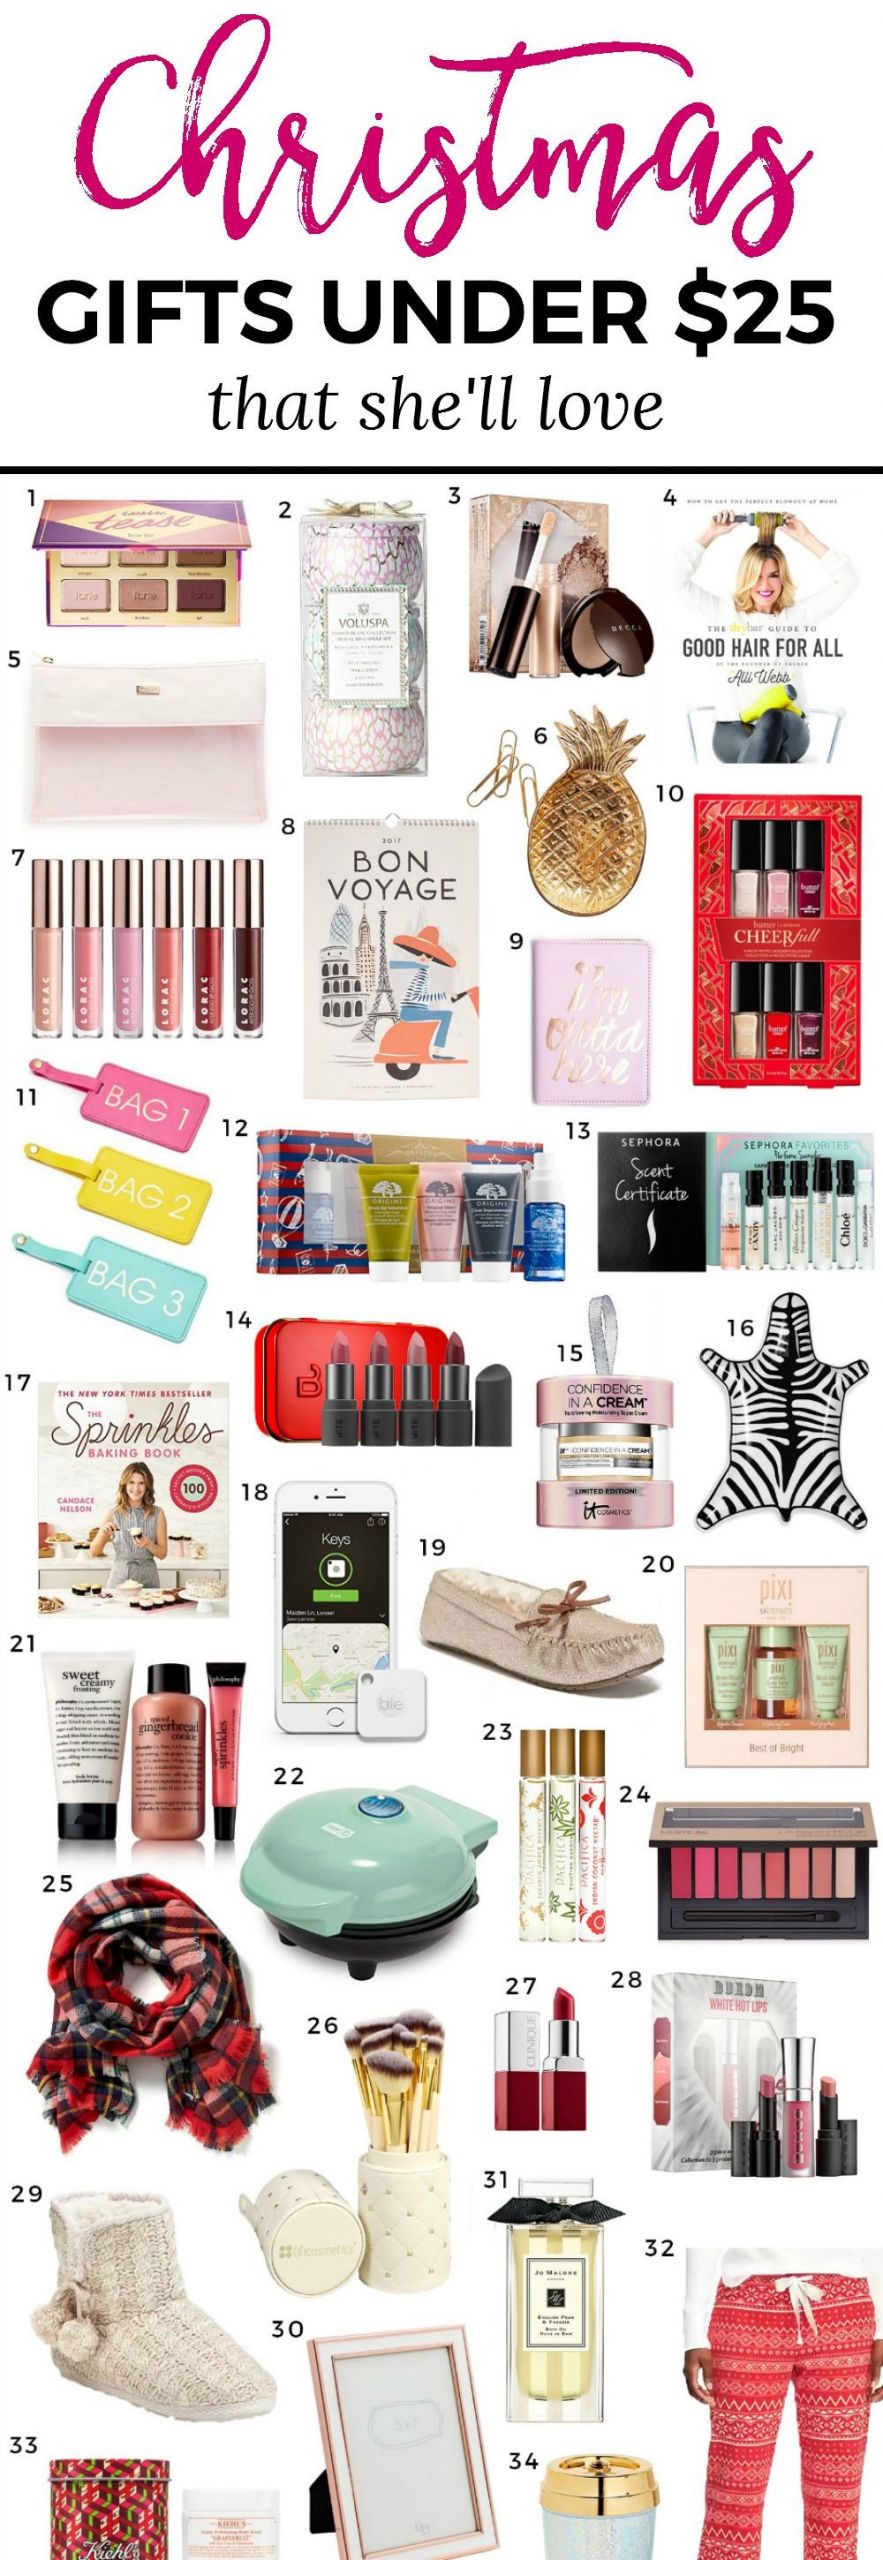 Holiday Gift Ideas Under $25
 The Best Christmas Gift Ideas for Women under $25